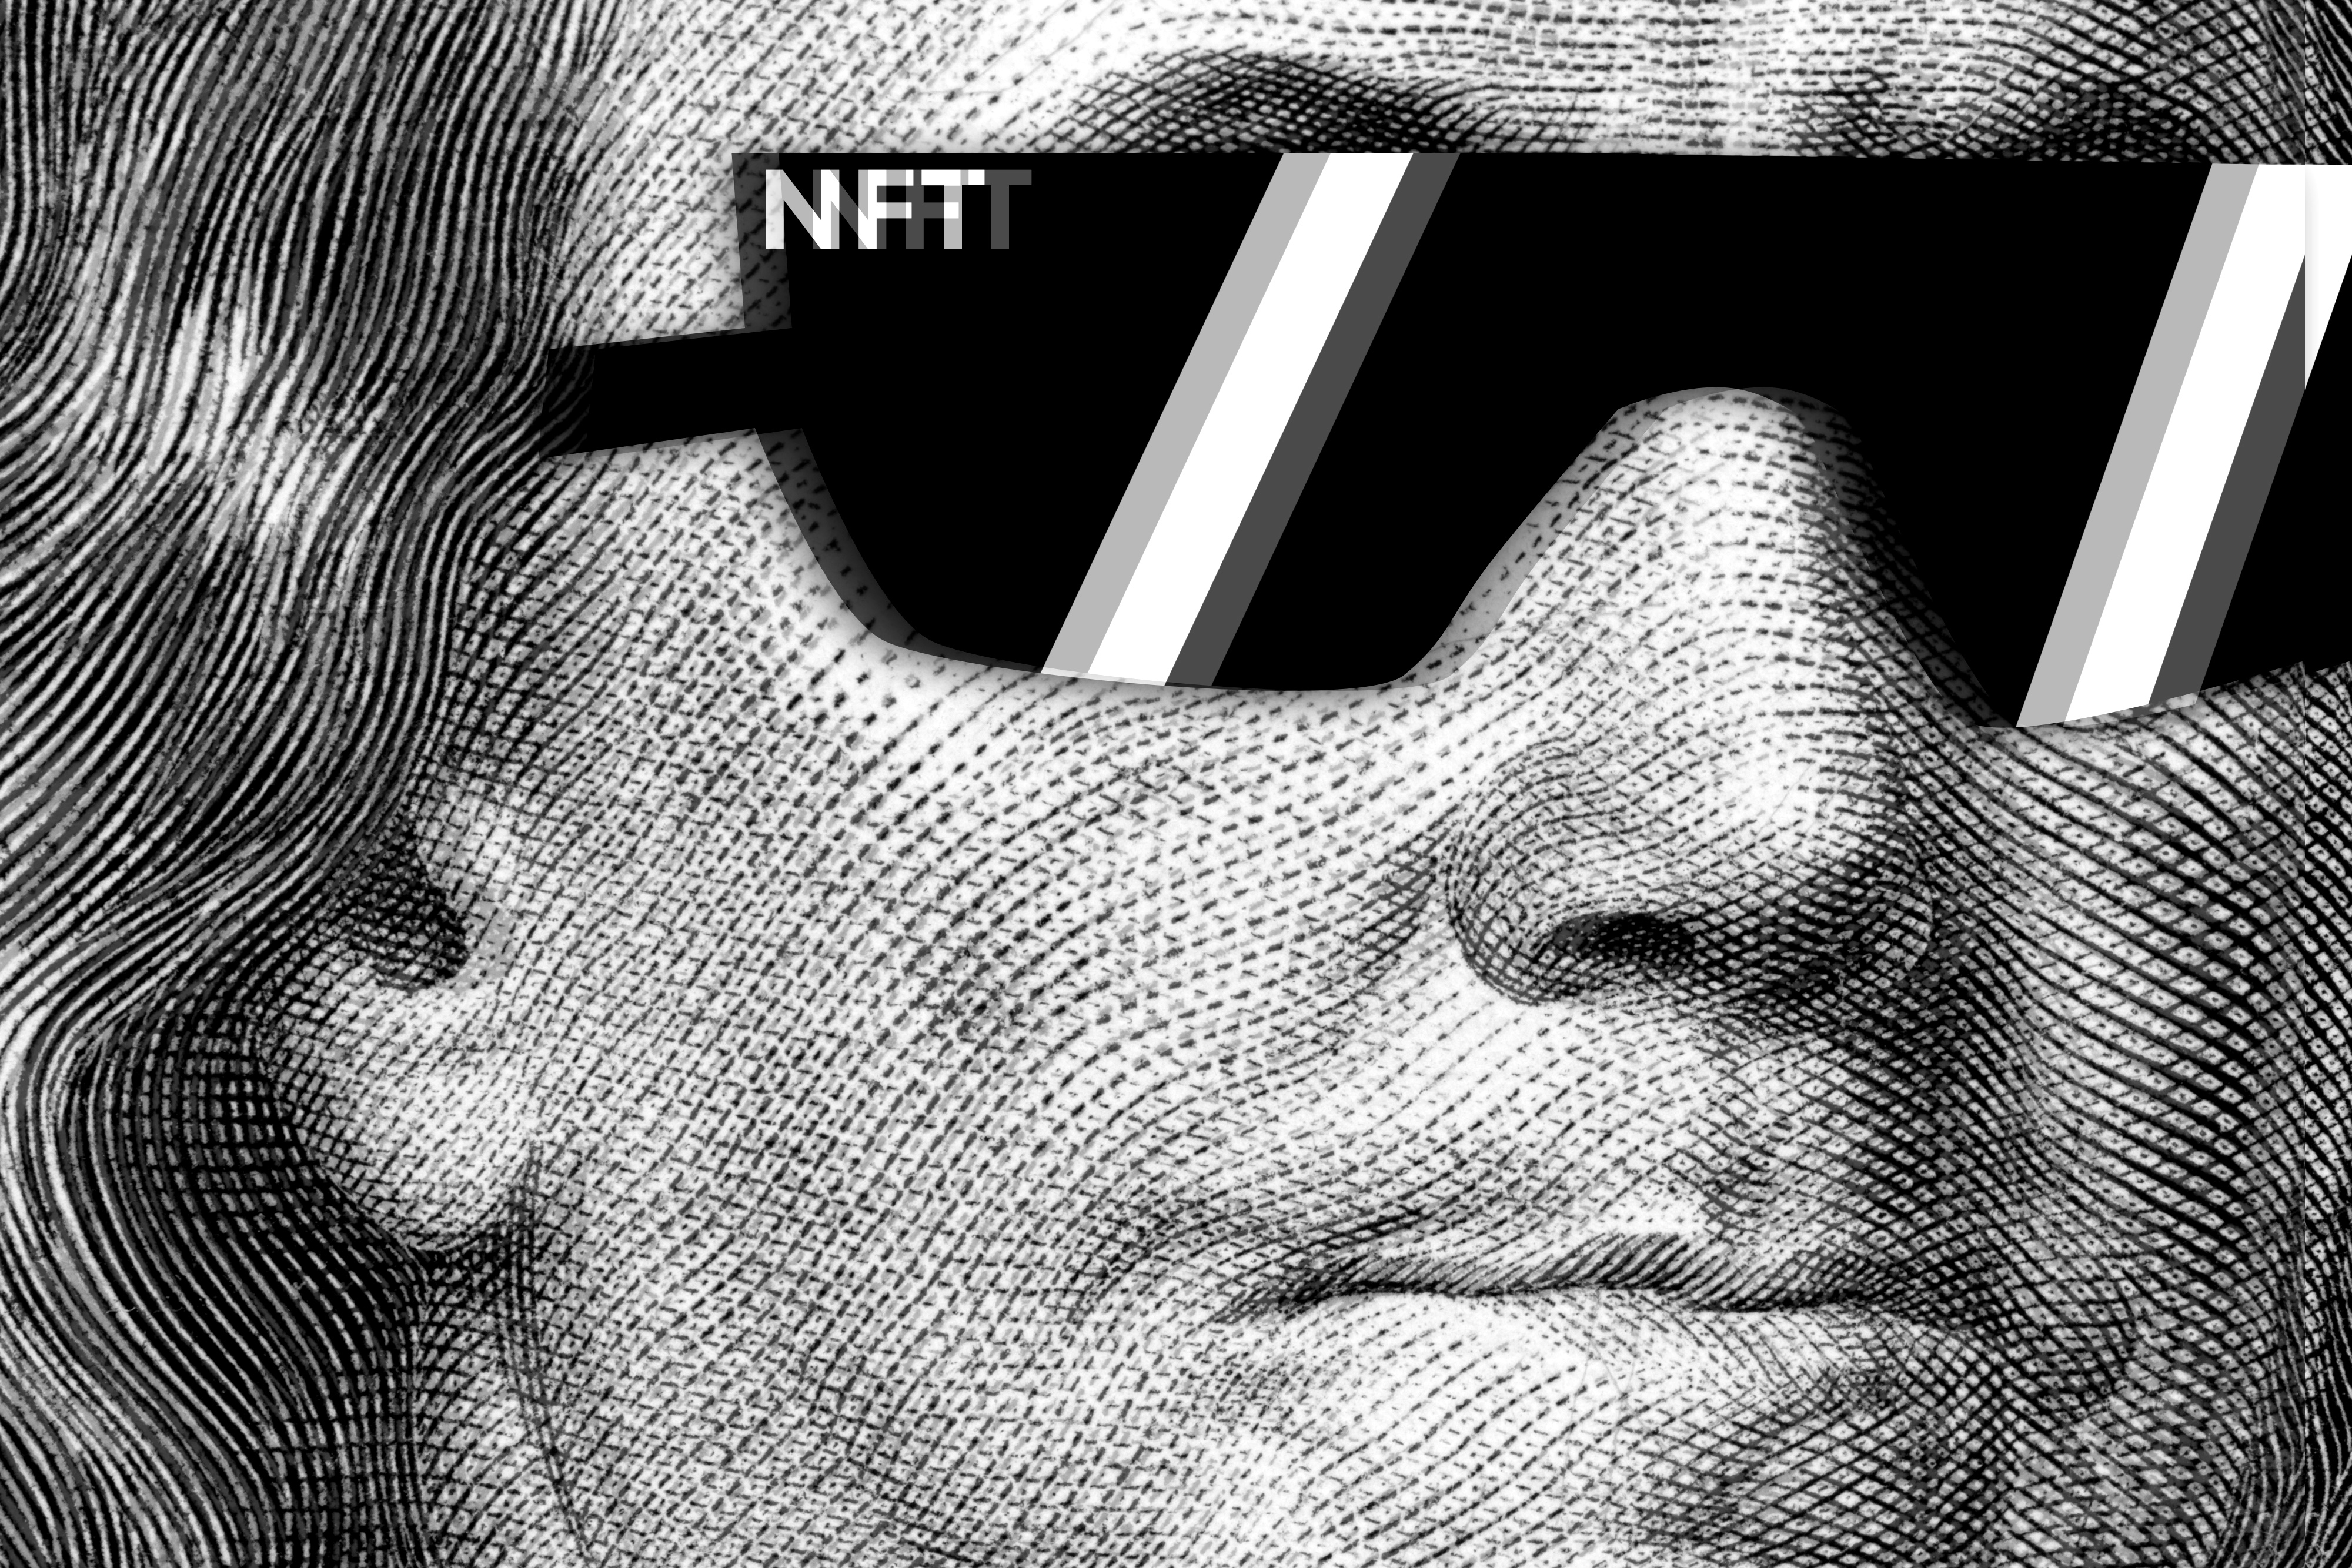 NFTs: what legal issues should you be aware of?